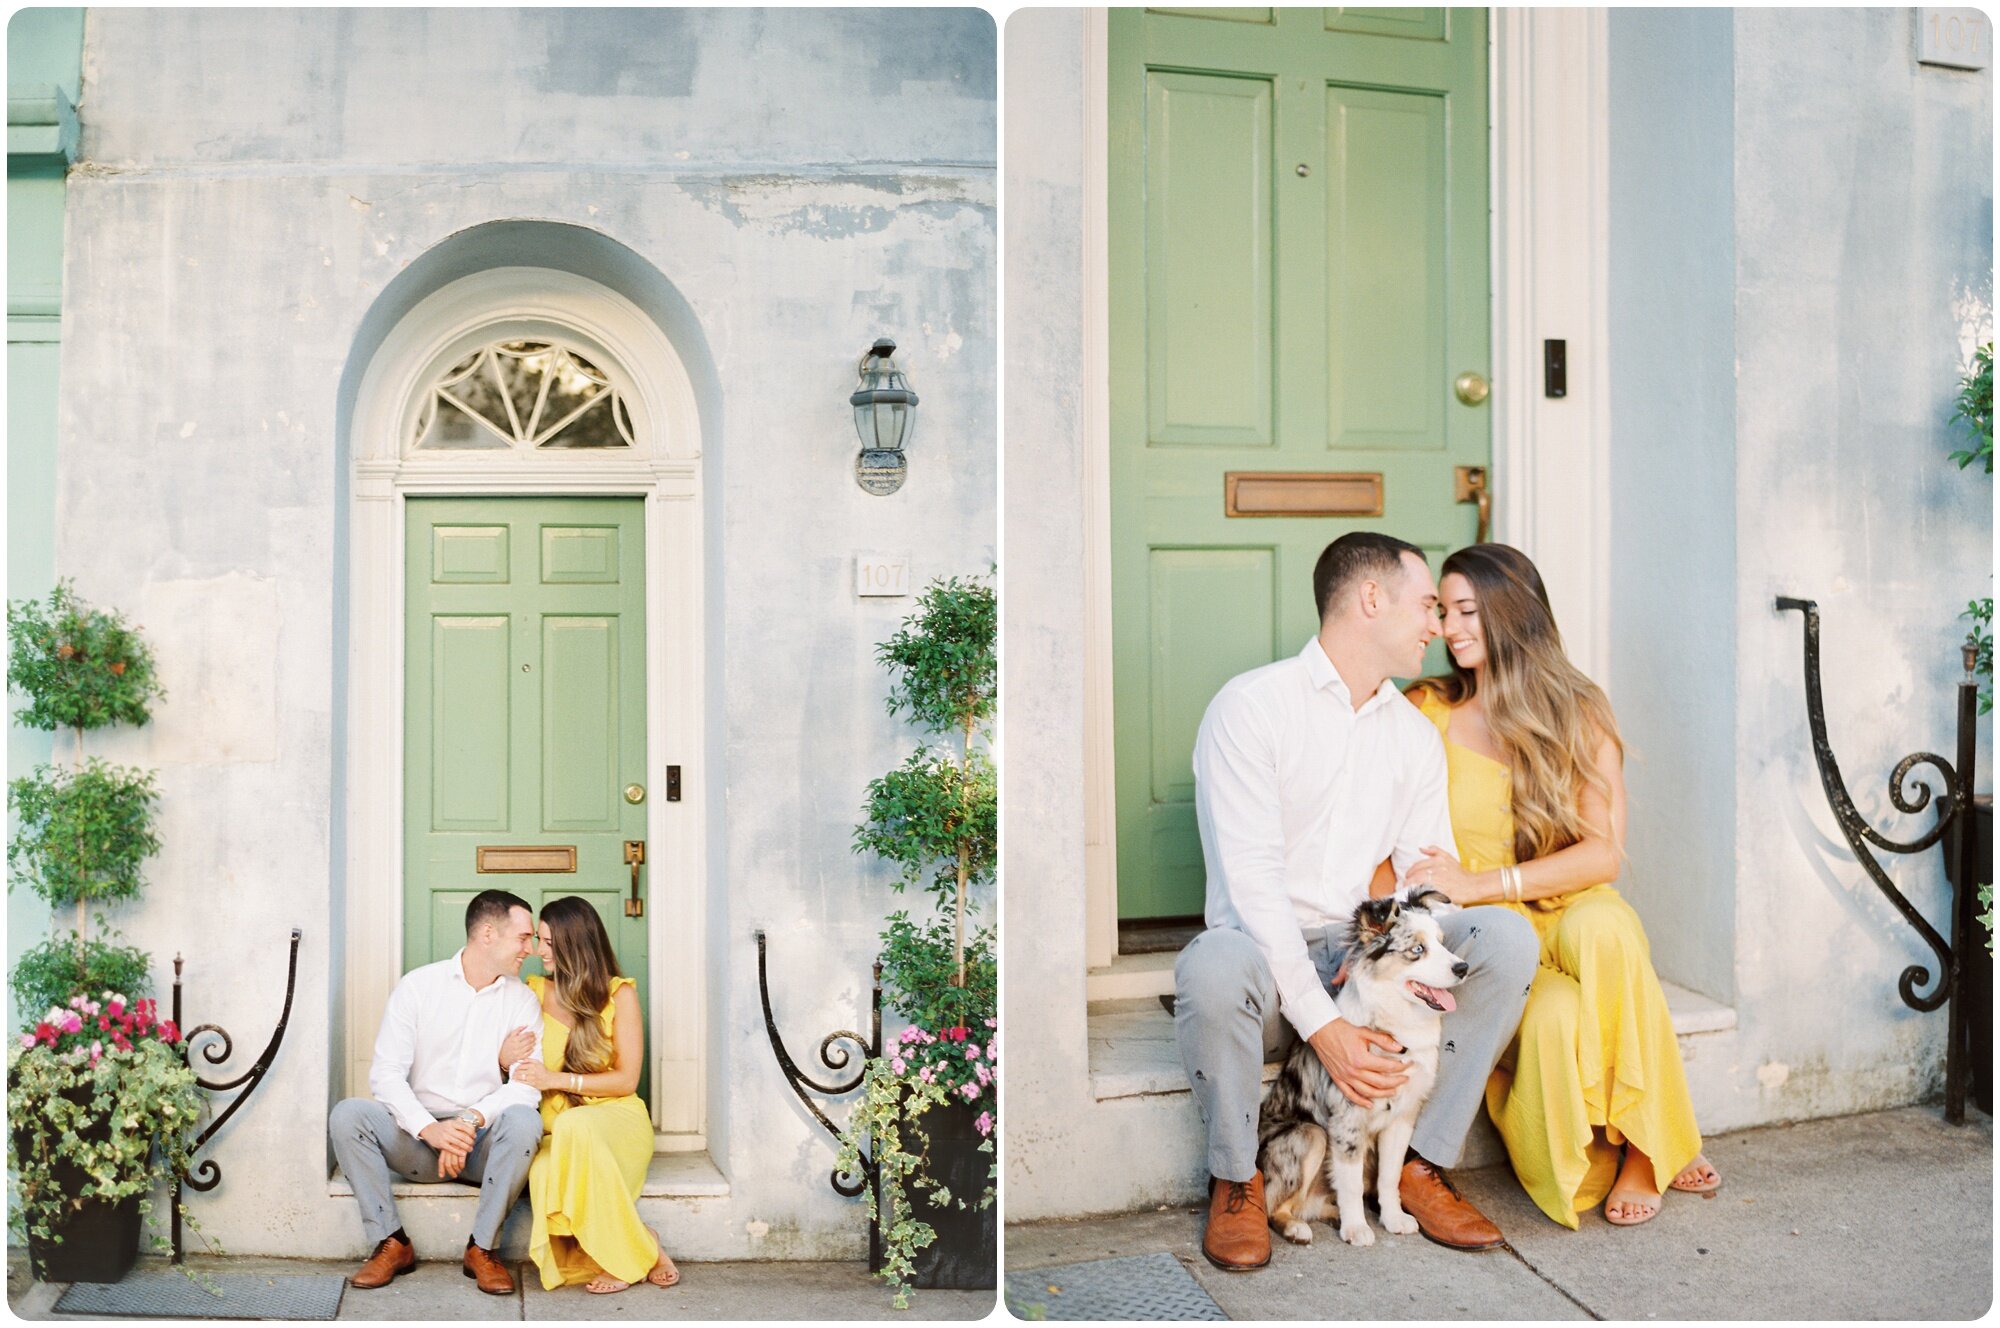 rainbow_row_yellow_blue_outfit_battery_downtown_charleston_engagement_puppy_outdoor_wedding_photographers_husband_wife_team_kailee_tim_kailee_dimeglio_photography_charleston_traveling_photographers_0014.jpg